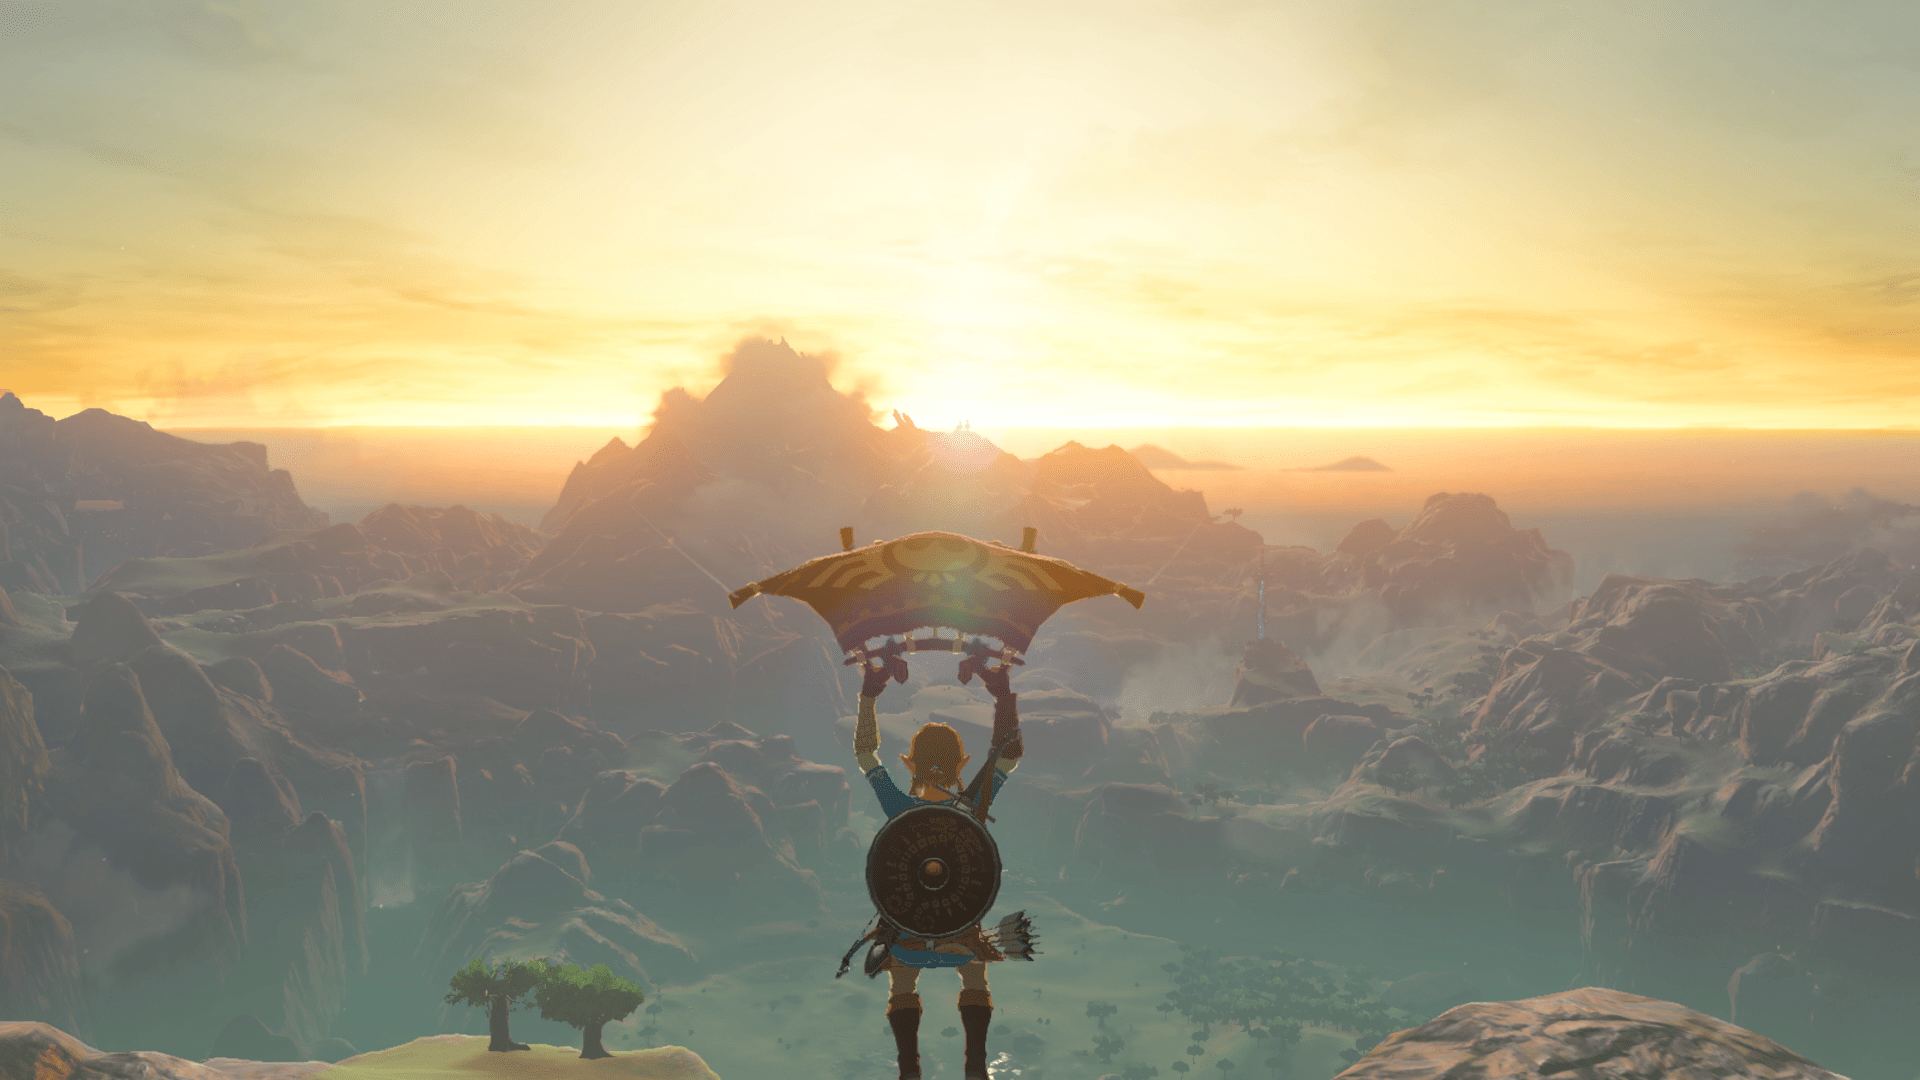 The Legend of Zelda: Breath of the Wild Game Review